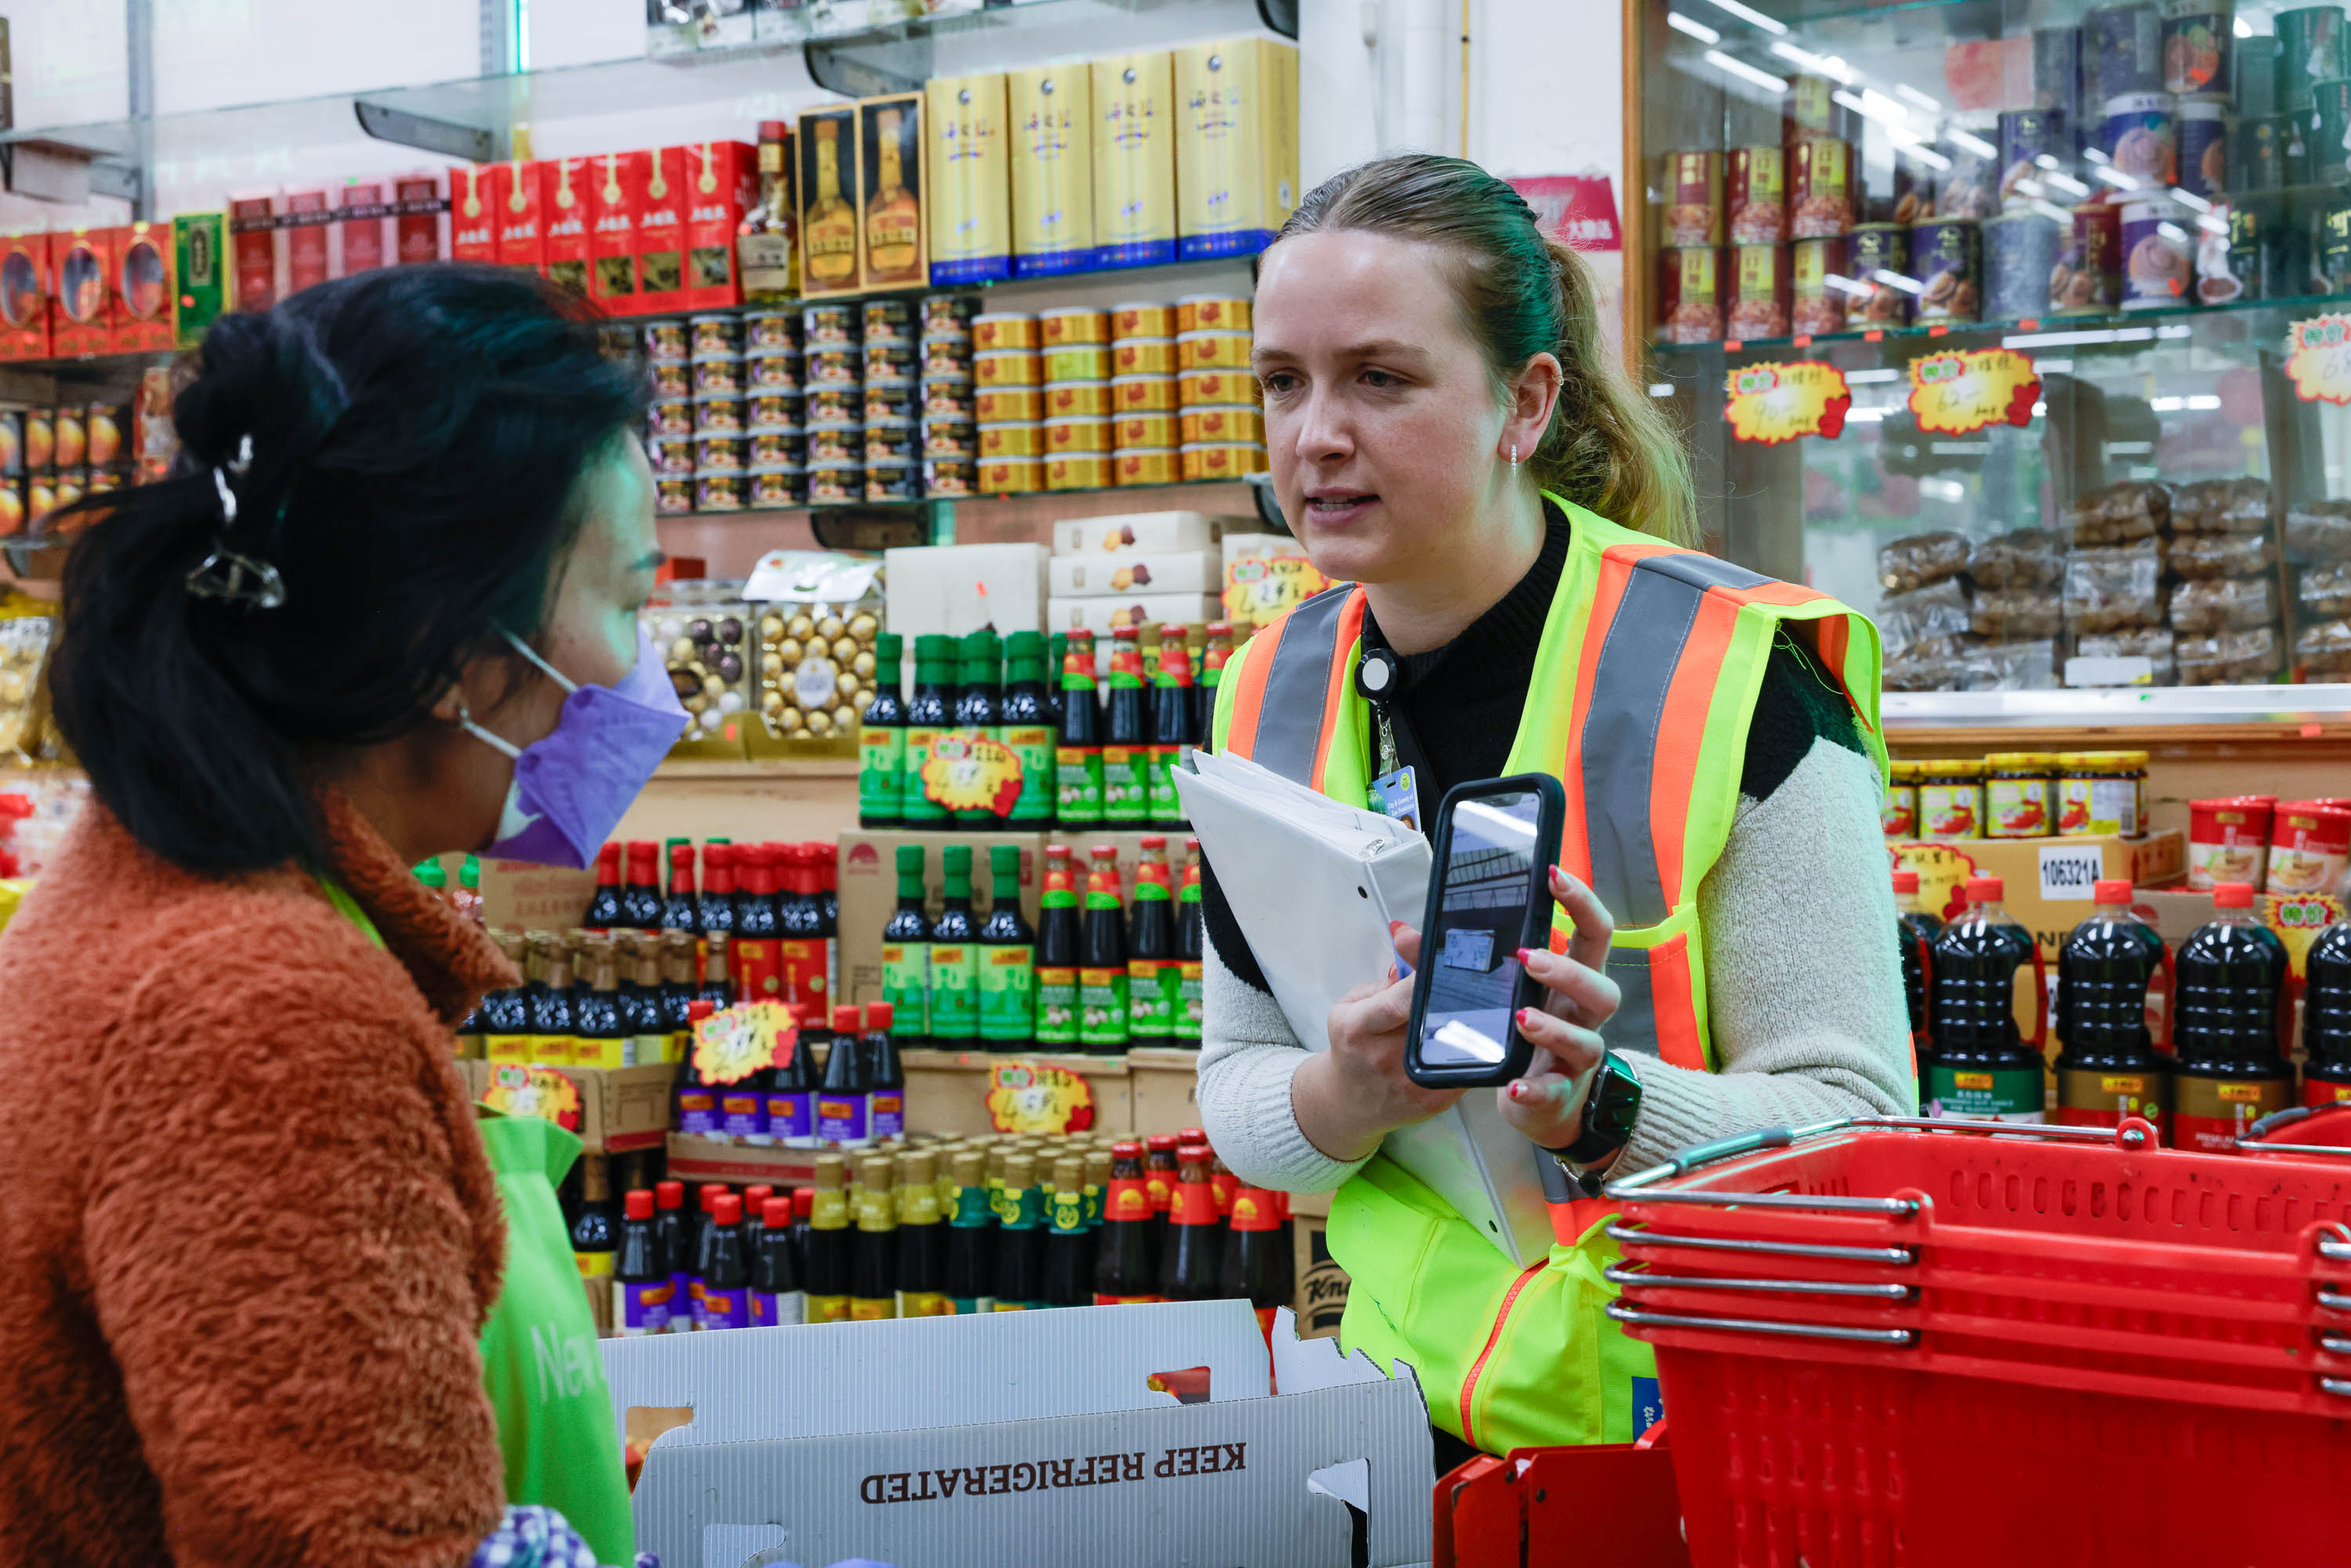 Two women converse in a store, one in a high-visibility vest holding a phone; shelves with goods surround them.